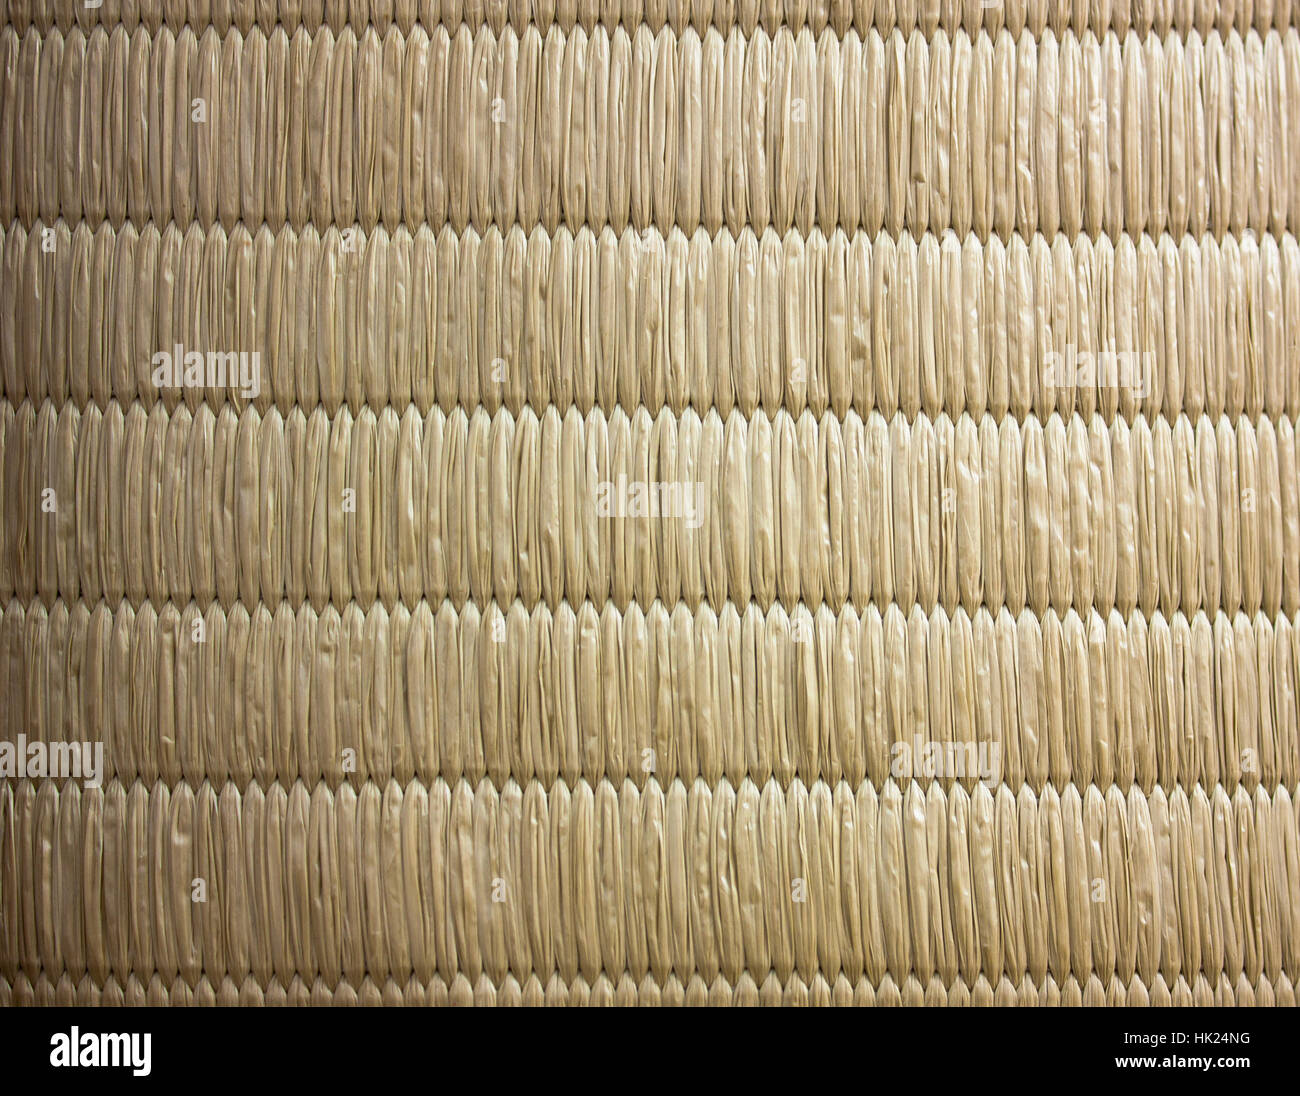 Top View Of Tatami Japanese Mat Texture Background Stock Photo